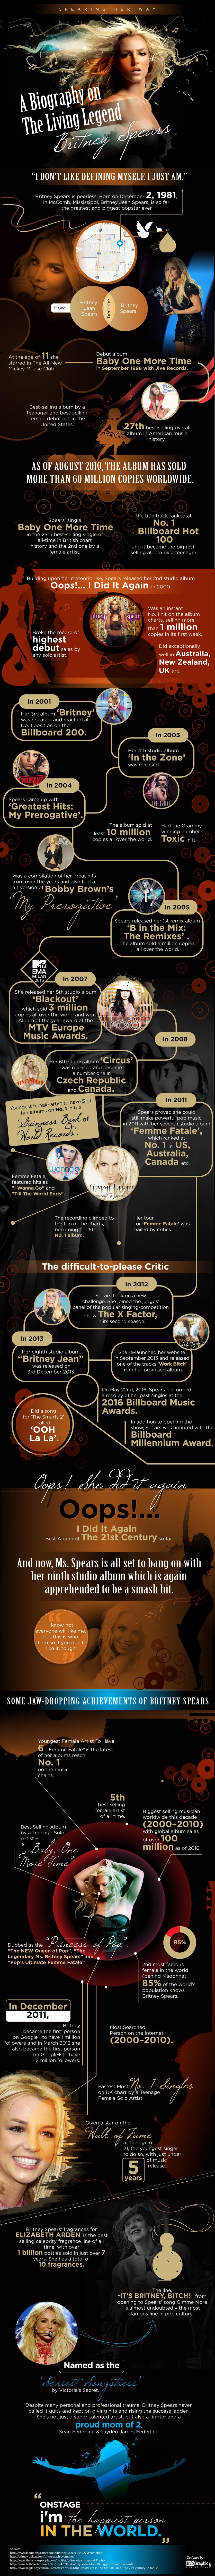 A Biography on The Living Legend - Britney Spears